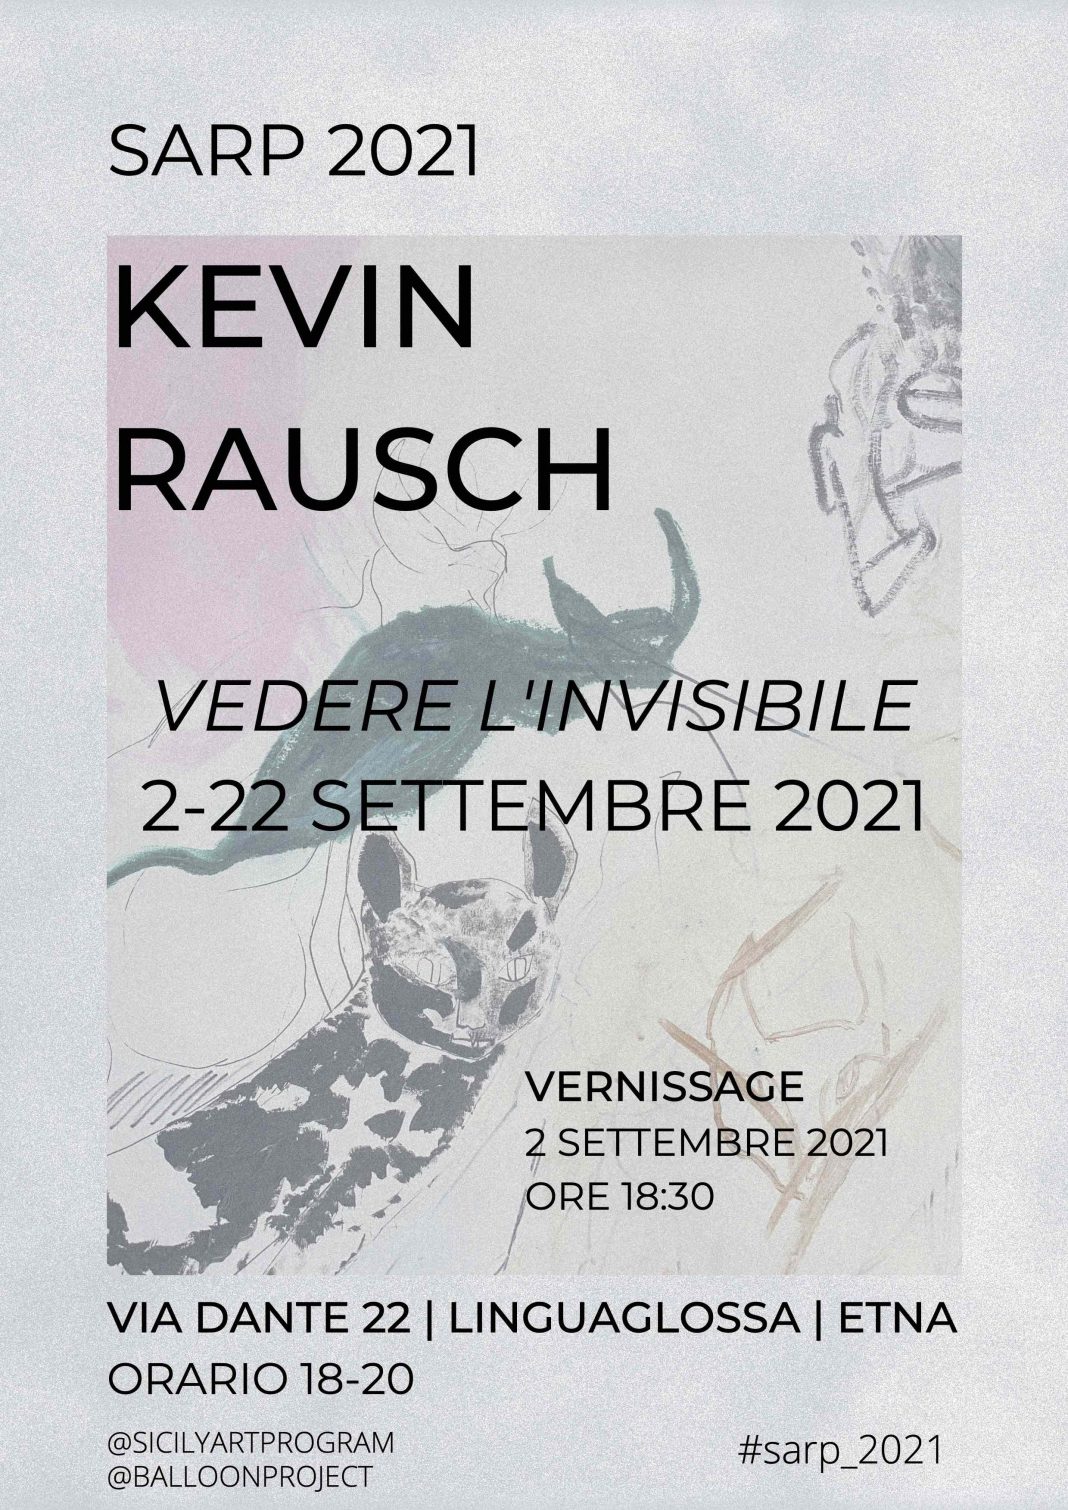 Kevin Rausch – Vedere l’invisibilehttps://www.exibart.com/repository/media/formidable/11/img/e45/SARP-2021-5-1068x1510.jpg